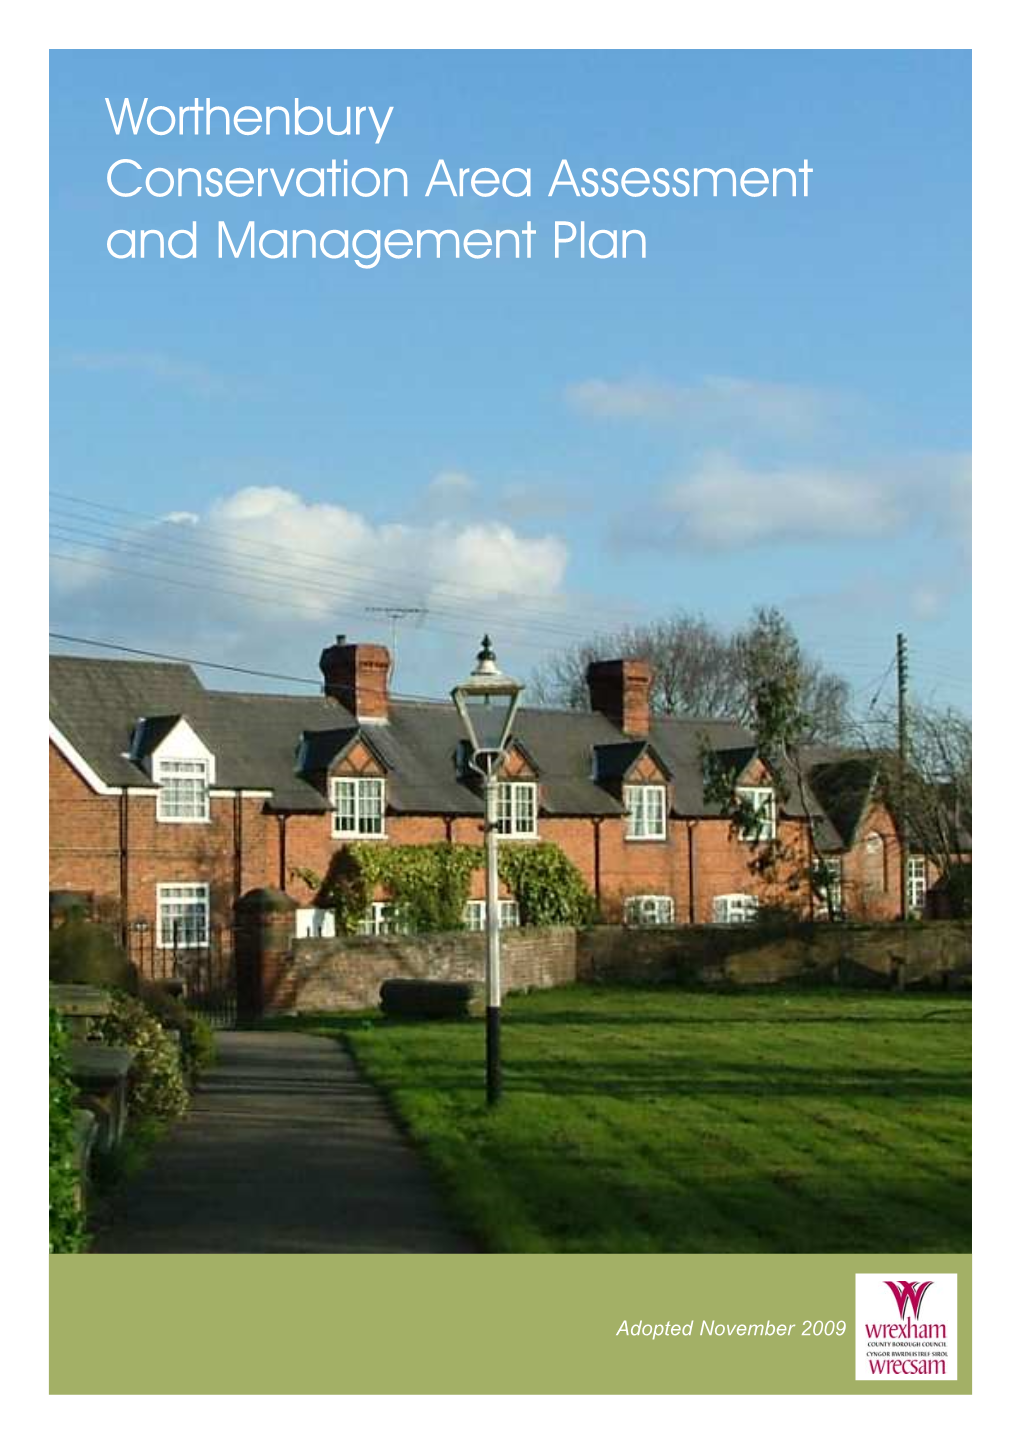 Worthenbury Conservation Area Assessment and Management Plan